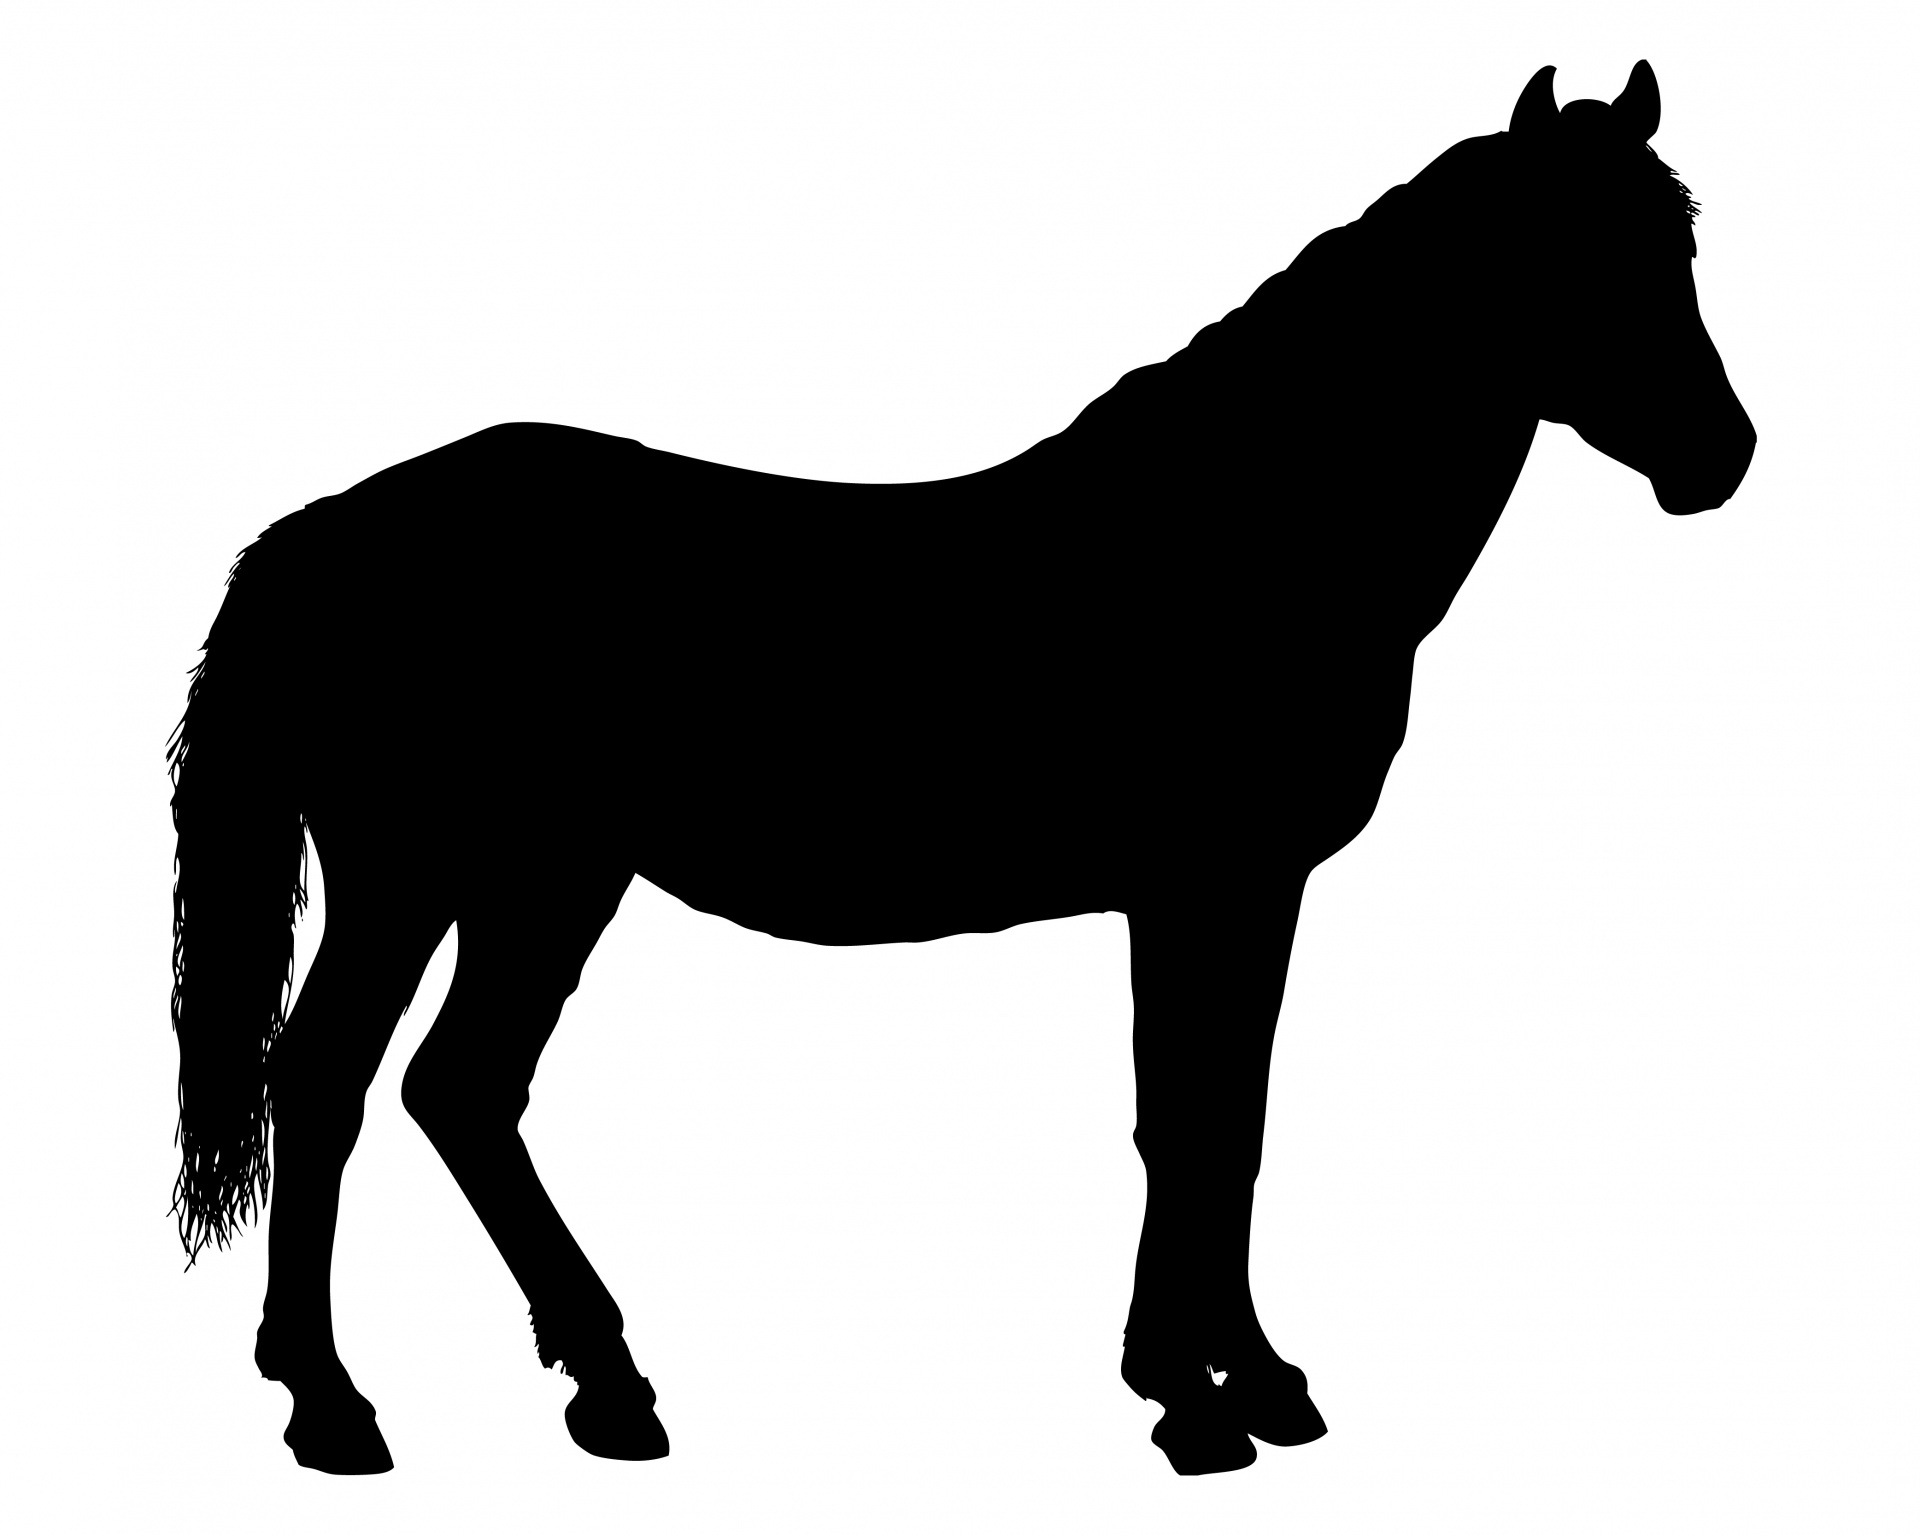 Black silhouette of a horse on white background